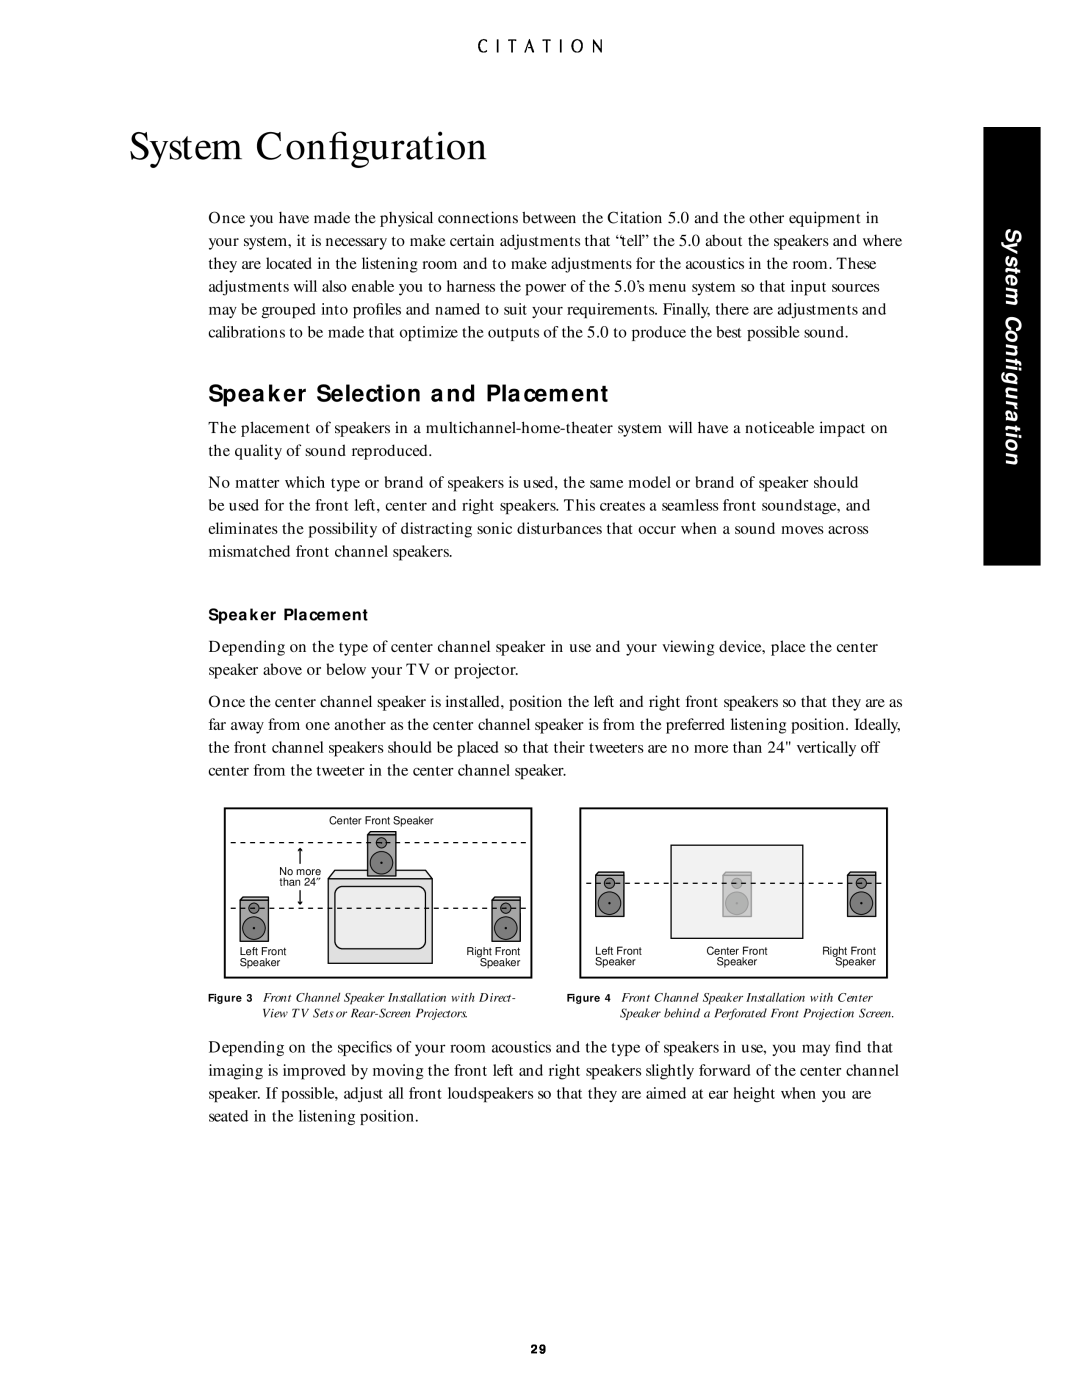 Citation Stereo Receiver owner manual System Conﬁguration, Speaker Selection and Placement 